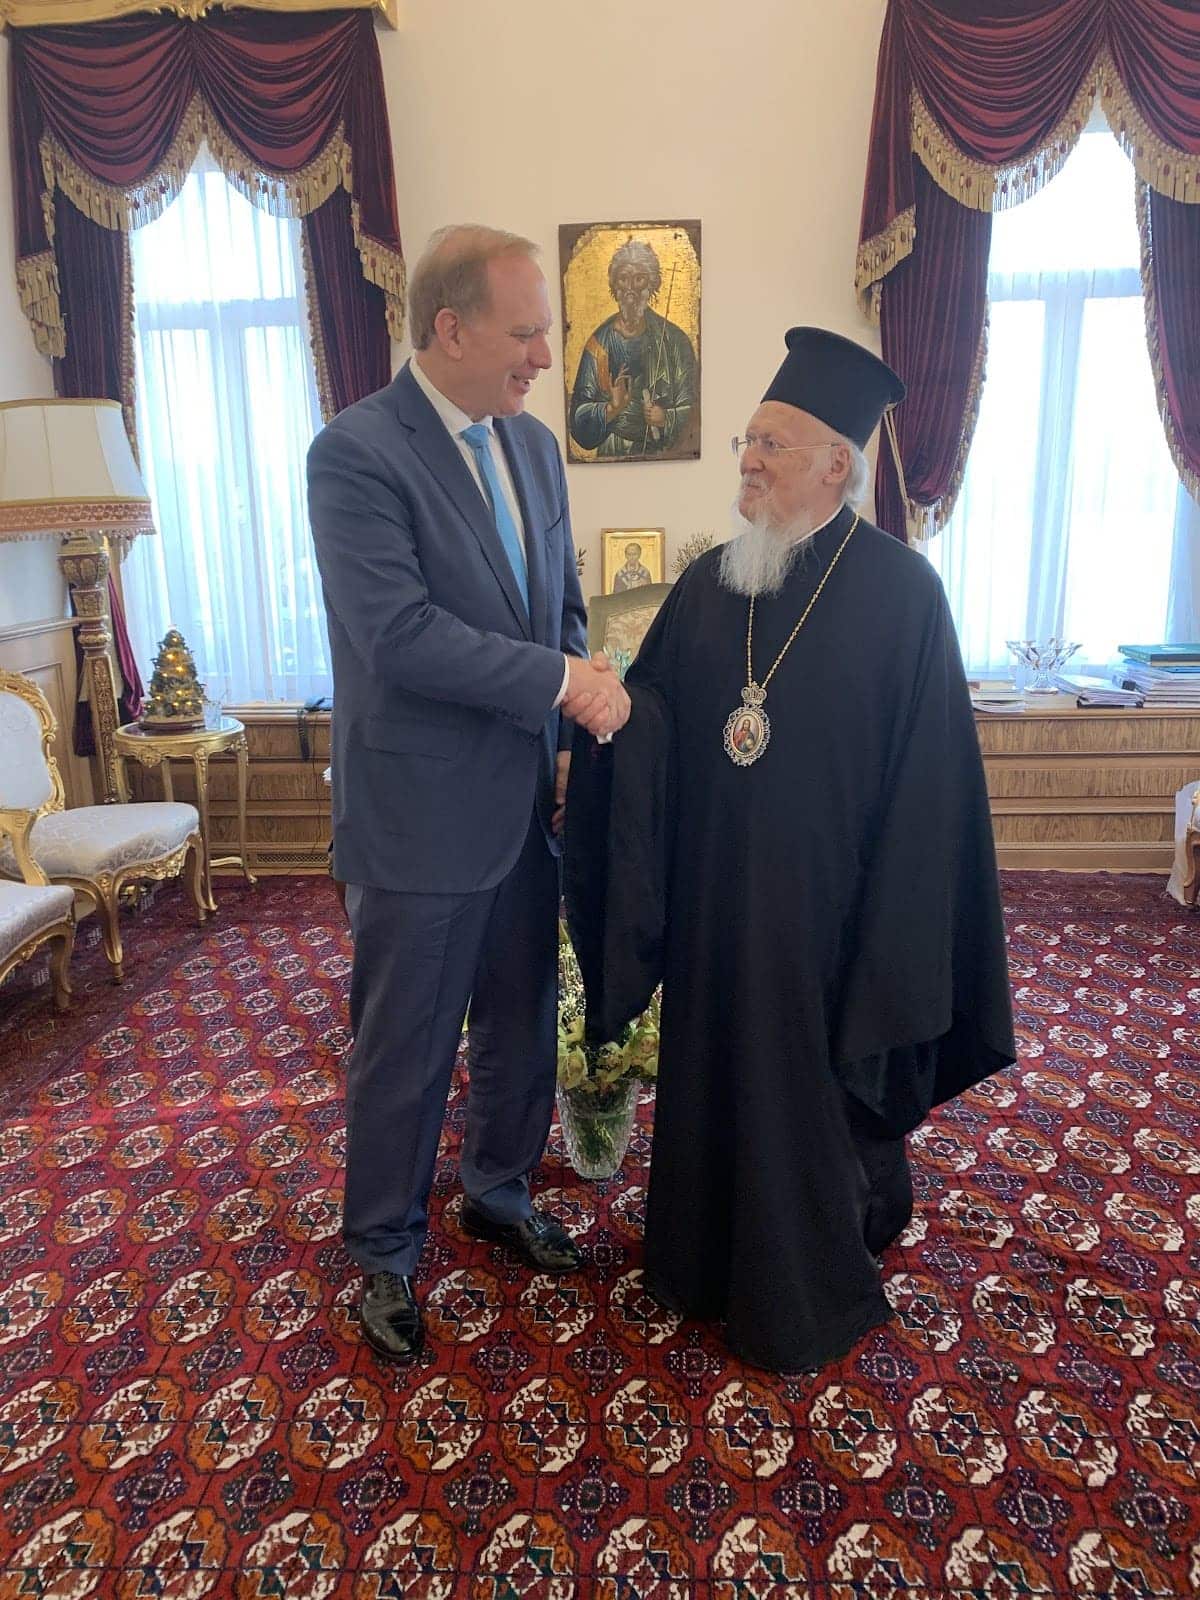 The Patriarch of the Greek Orthodox Church meets with Dr. Parker in Istanbul, Turkey.